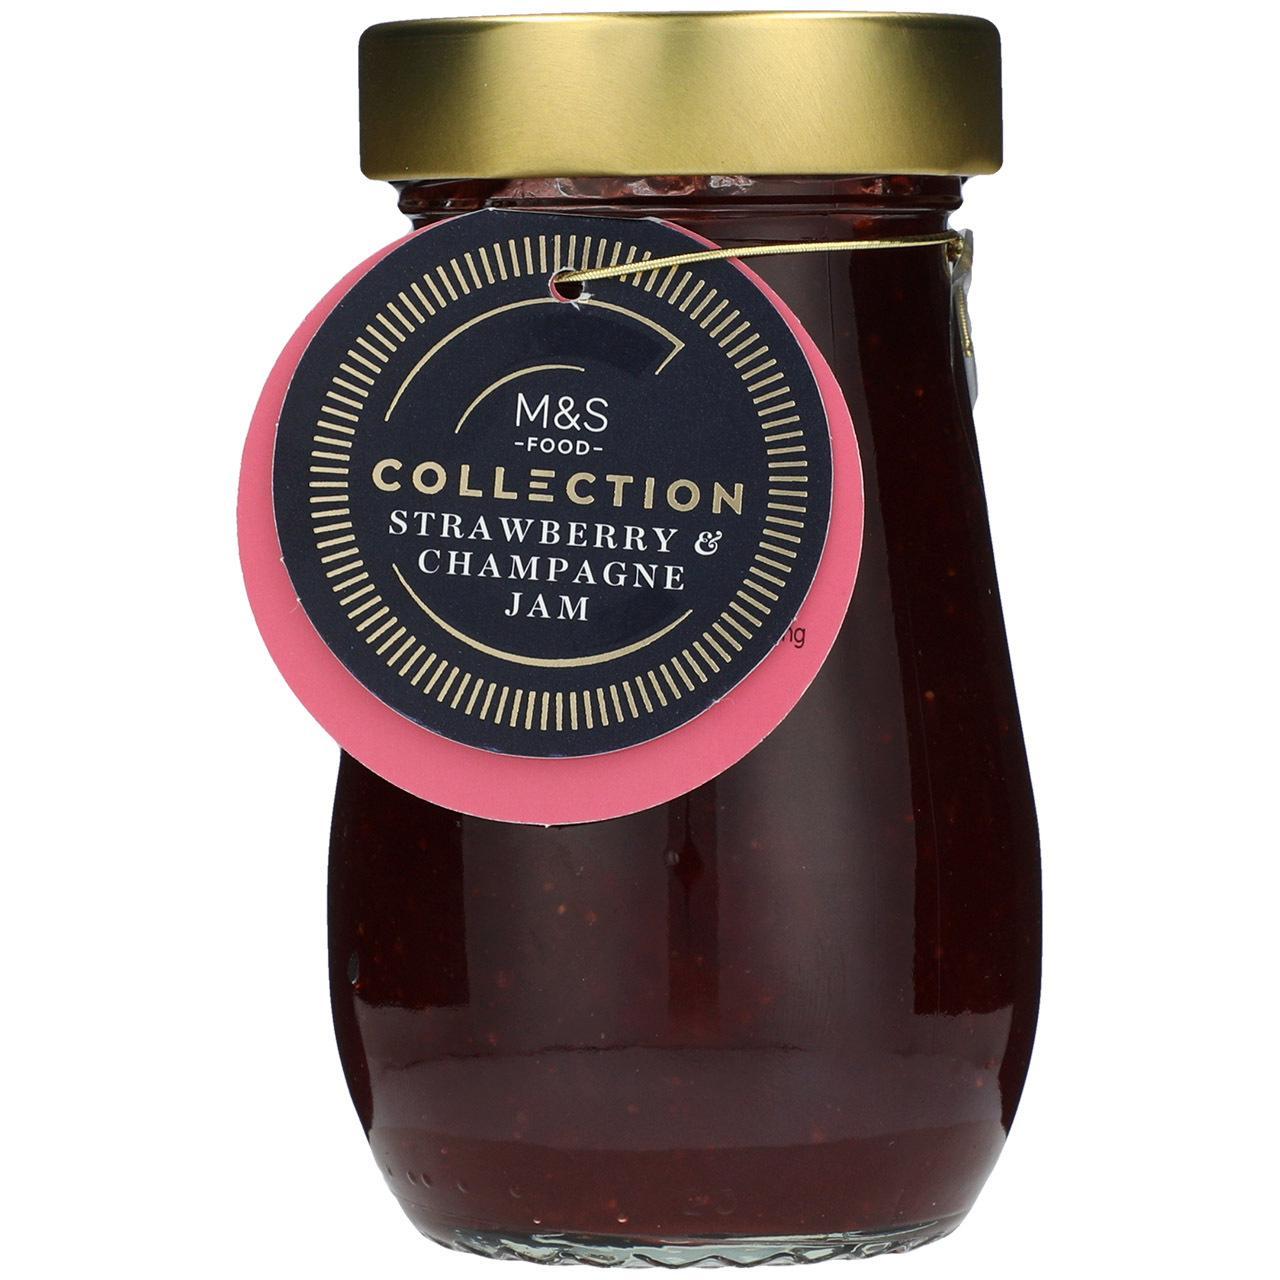 Collection Strawberry & Champagne Conserve